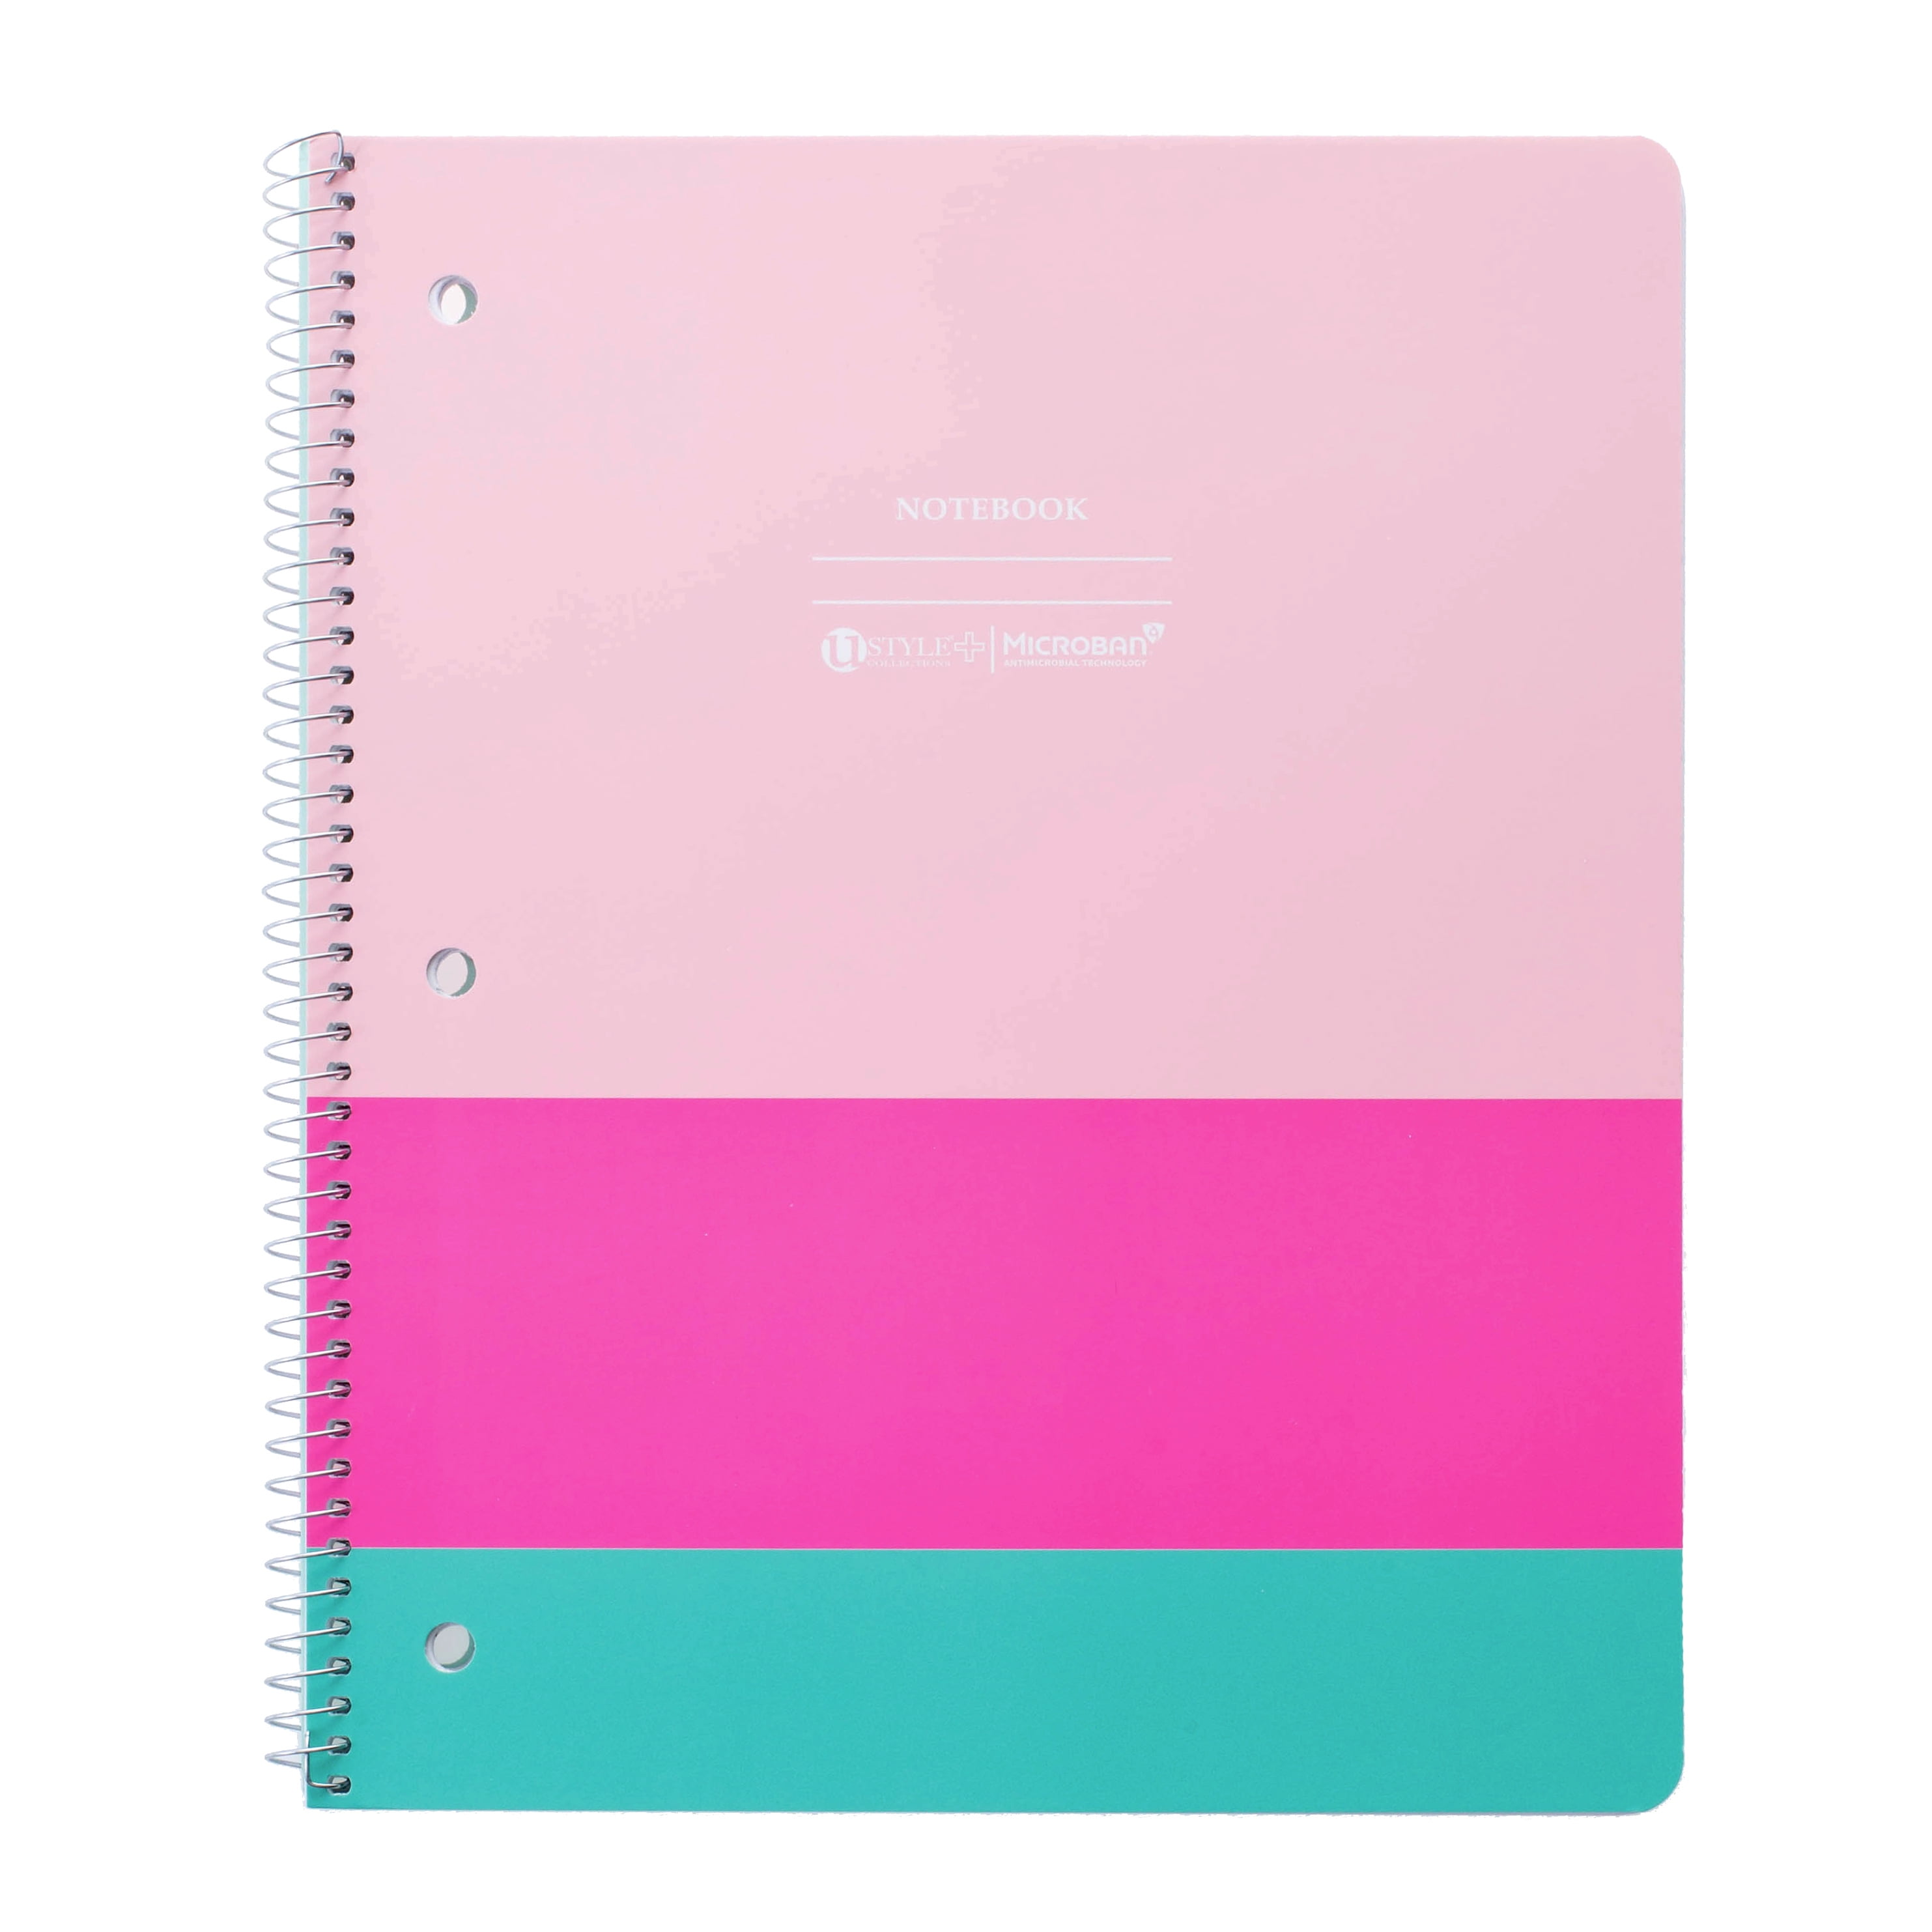 U Style Antimicrobial 1 Subject Notebook with Microban®, 80 Sheets, College  Ruled, 4 Pack, Fashion